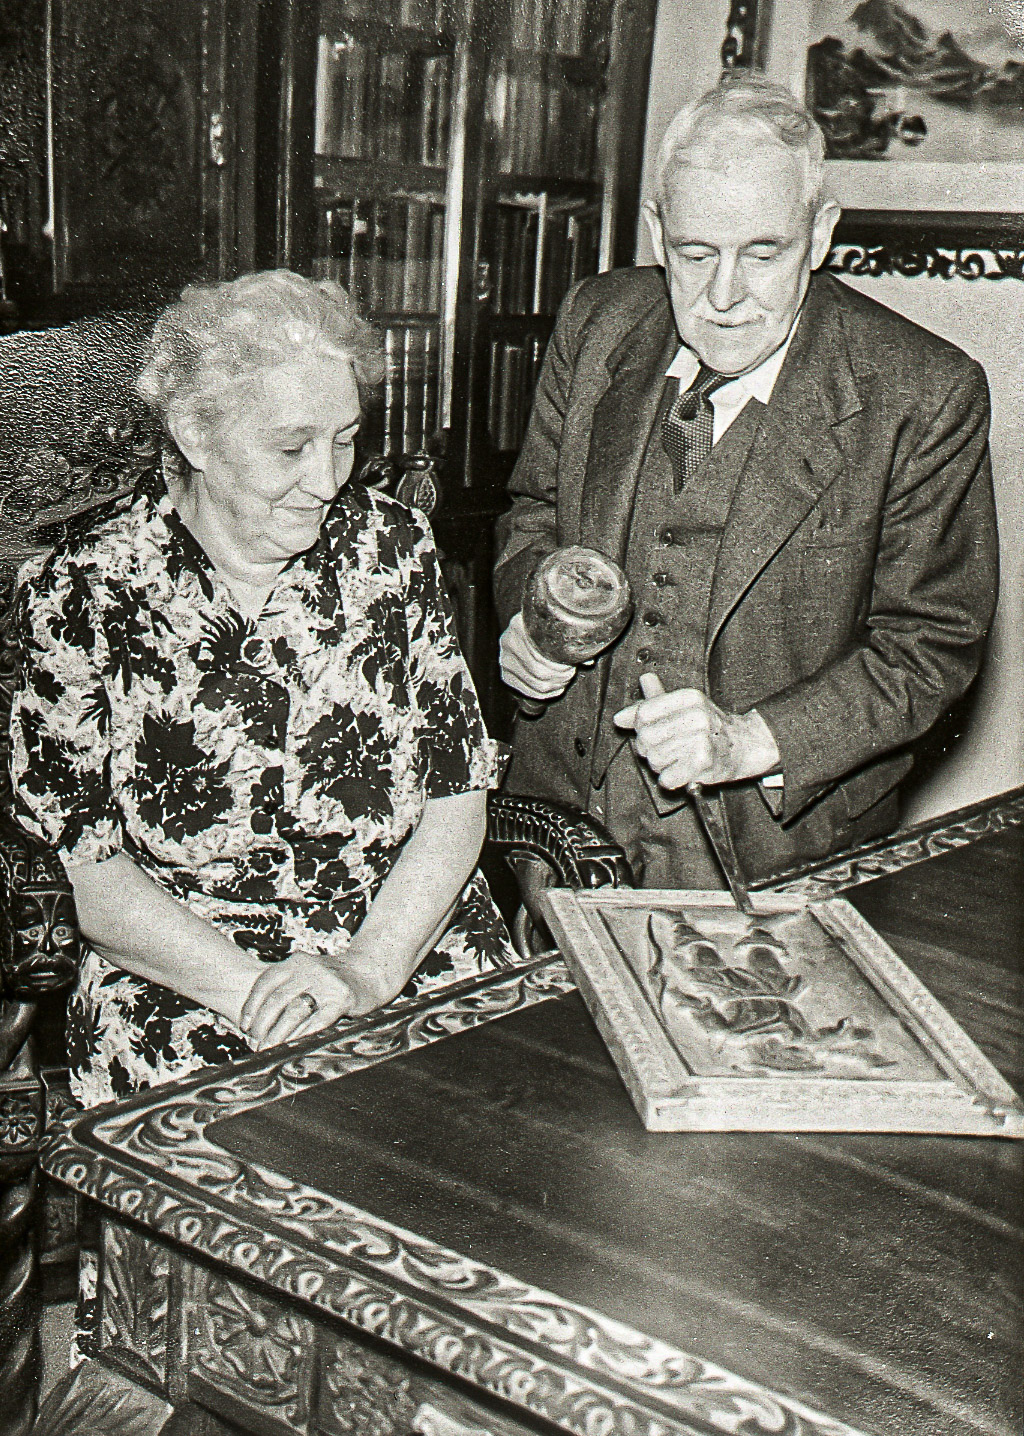 George Smith and his wife Winifred in the 1940s